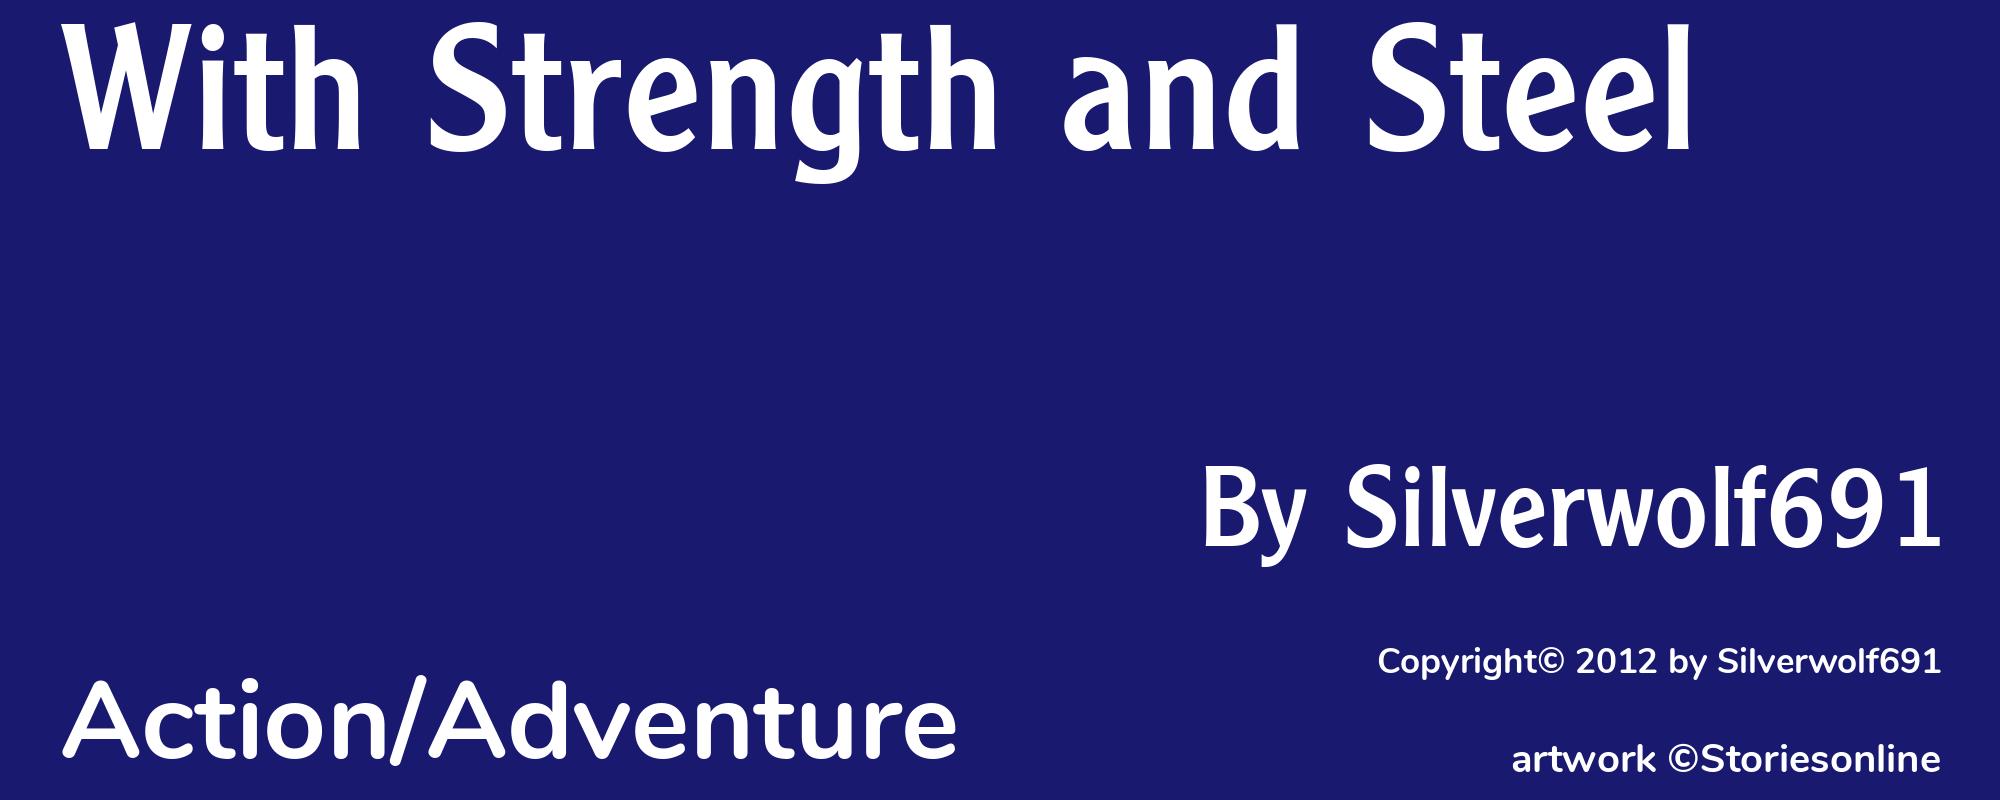 With Strength and Steel - Cover